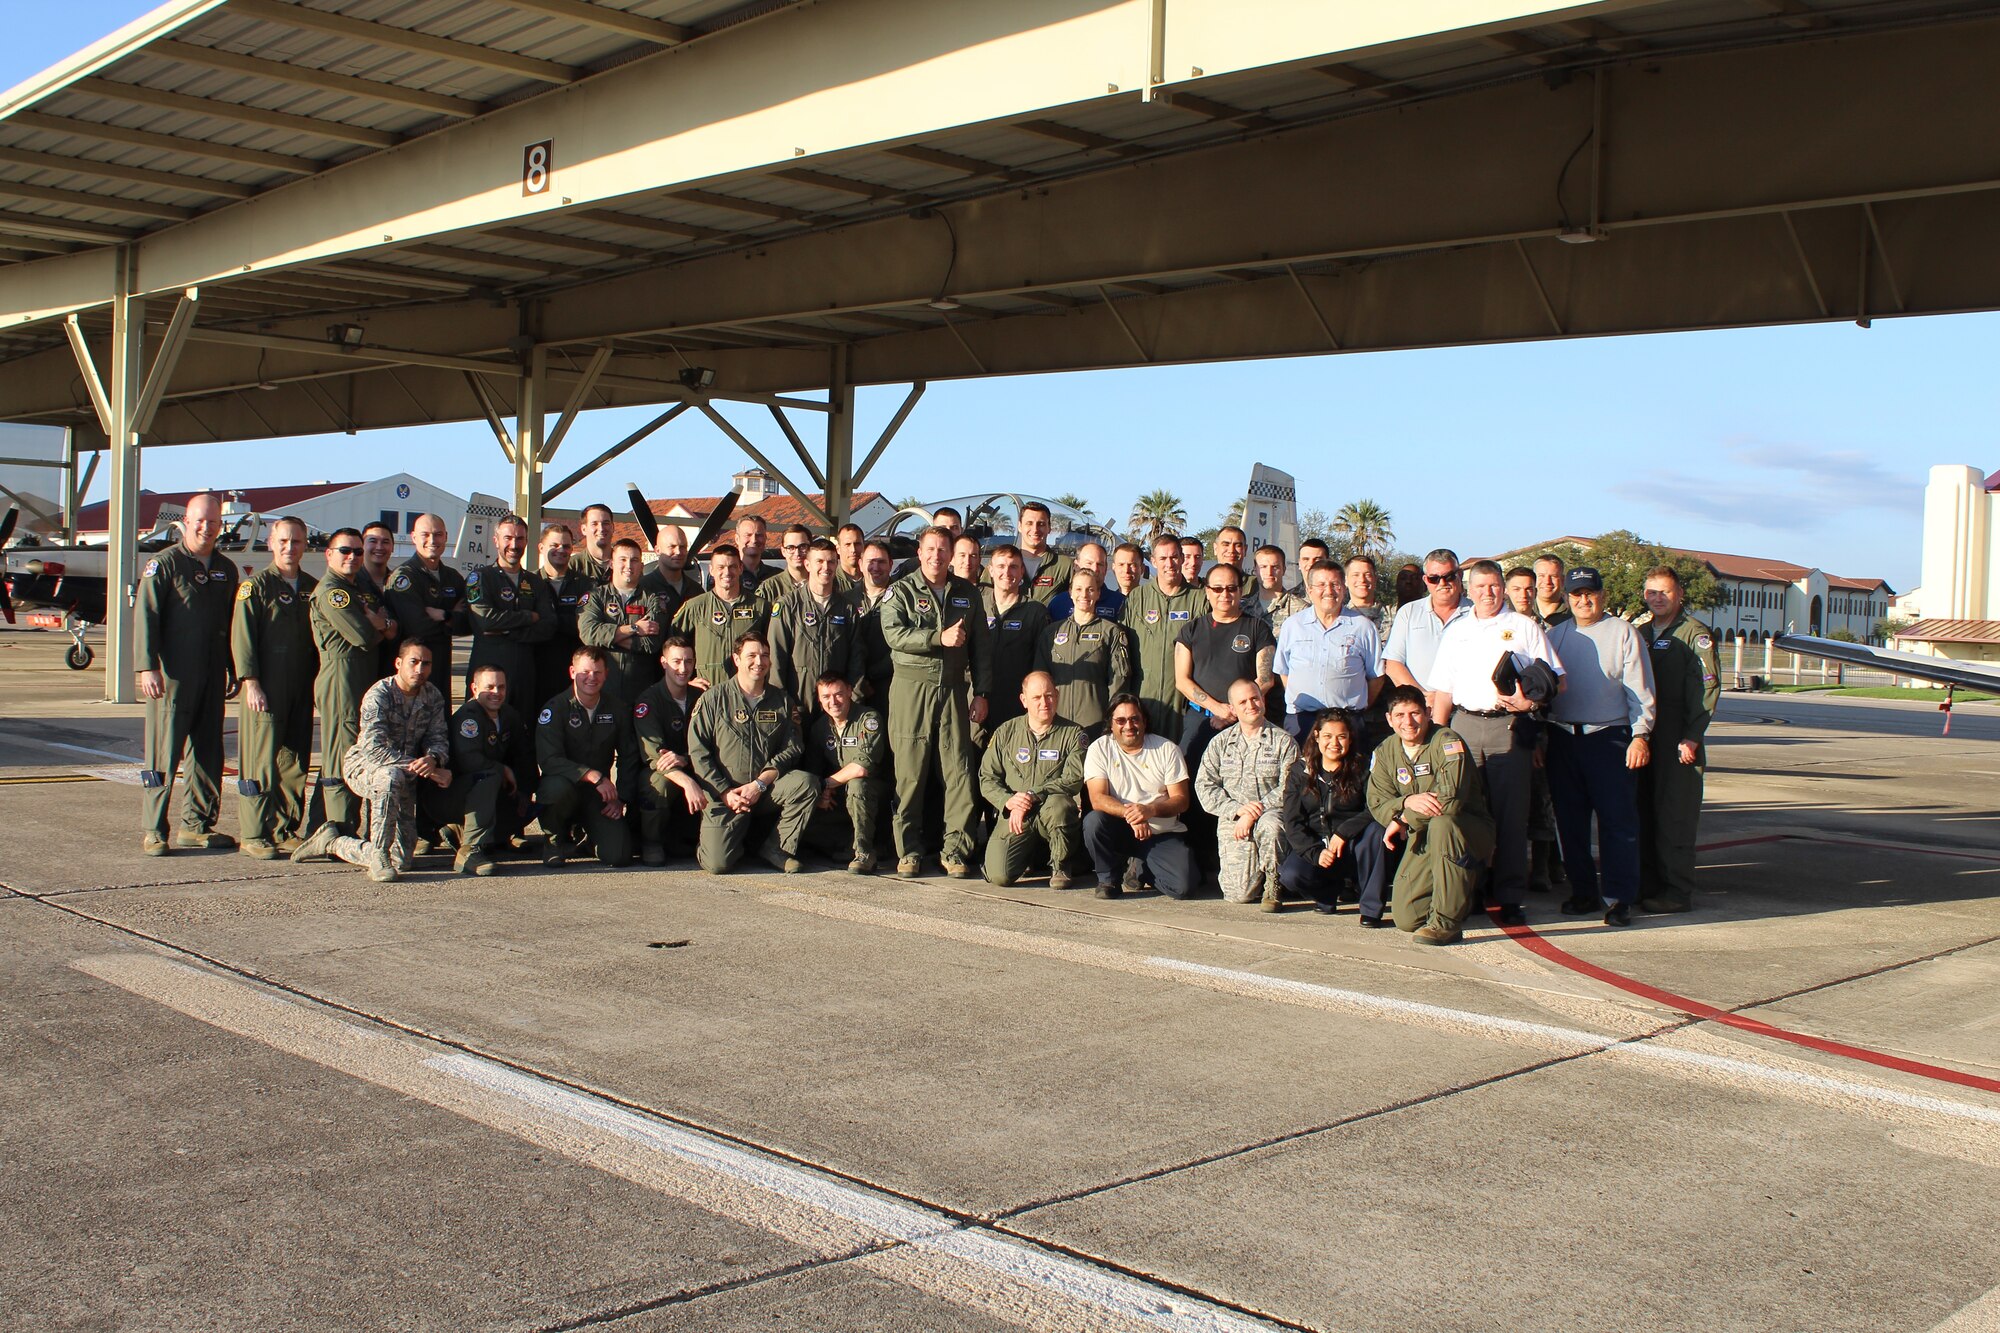 U.S. Air Force Maj. Gen. Patrick Doherty, 19th Air Force commander, and Air Education and Training Command pilots, maintainers and flight surgeons, plus NASA personnel gather for a photograph during the command’s collection and analysis of operational flight test data at Joint Base San Antonio-Randolph.  The T-6 operational pause which began Feb. 1 was lifted Feb. 27.  Following the incidents, a team including experts from the Air Force, Navy, NASA, and medical specialties, came together to aggressively capture and analyze data from the pilots who had experienced physiological events and the aircraft. Collaboration with Navy officials allowed 19th Air Force officials to gain insights and lessons learned from similar events in the T-45 Goshawk. (Courtesy Photo)